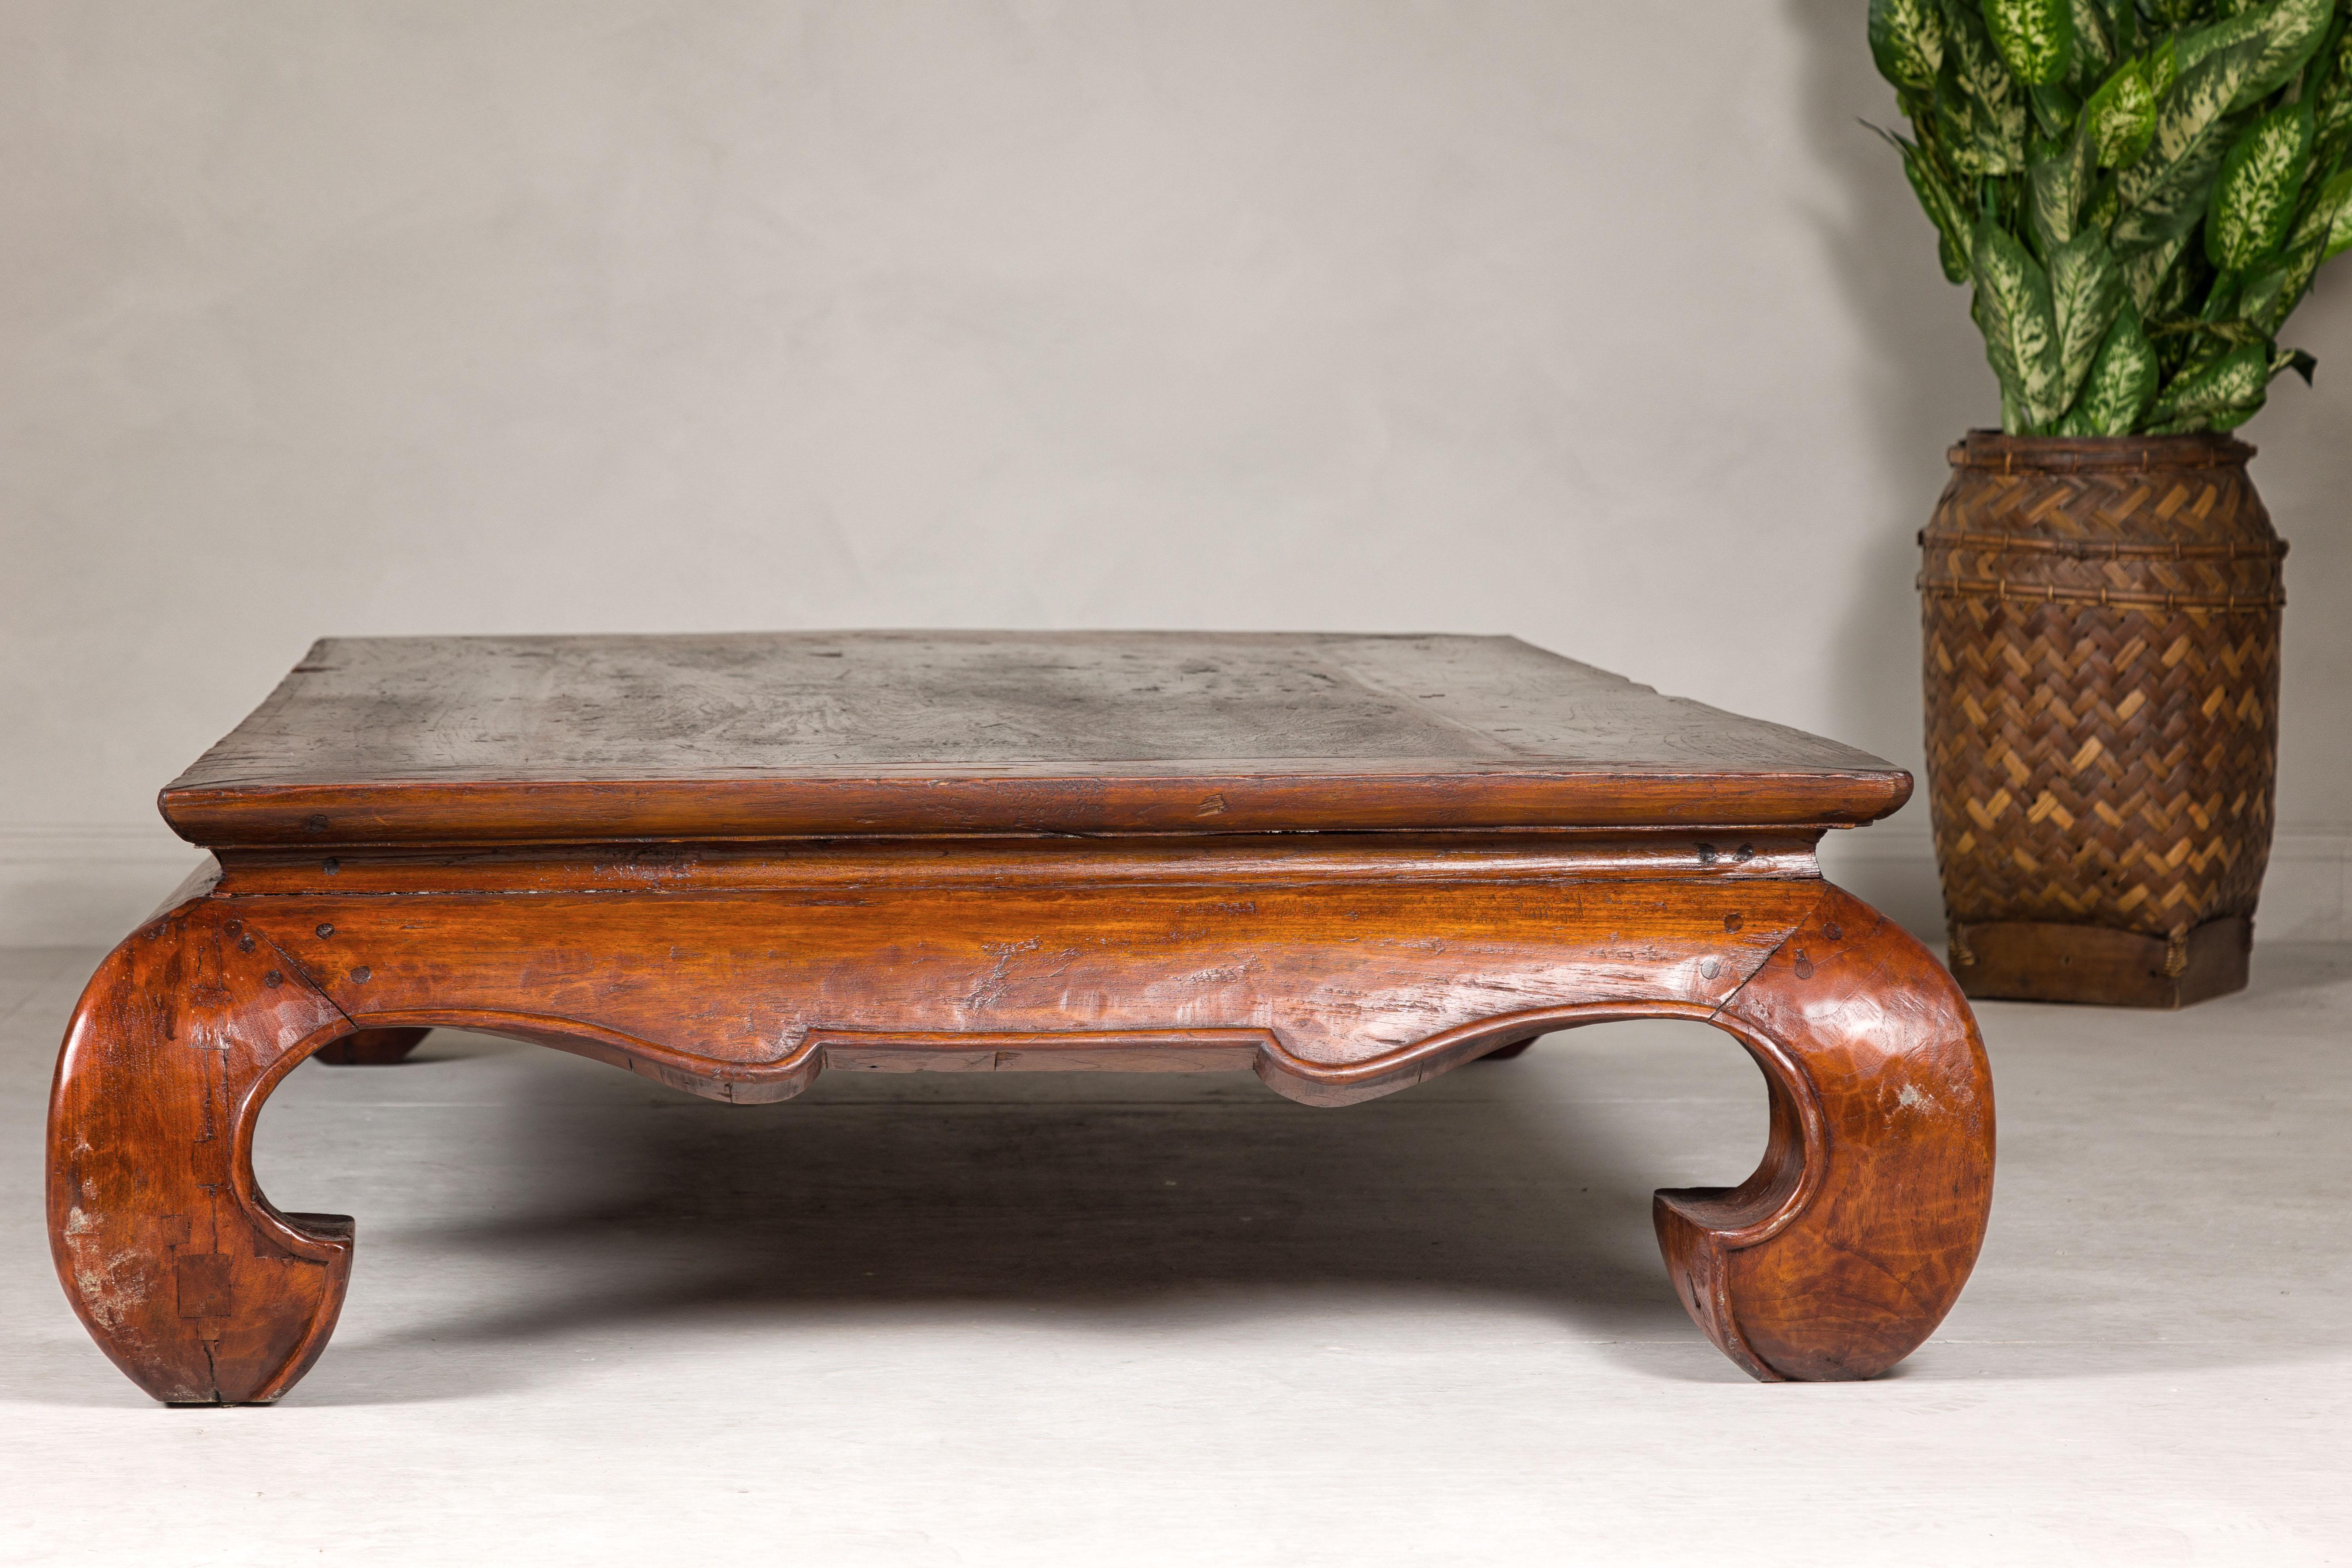 Qing Dynasty 19th Century Chow Leg Kang Table with Weathered Rustic Patina For Sale 12